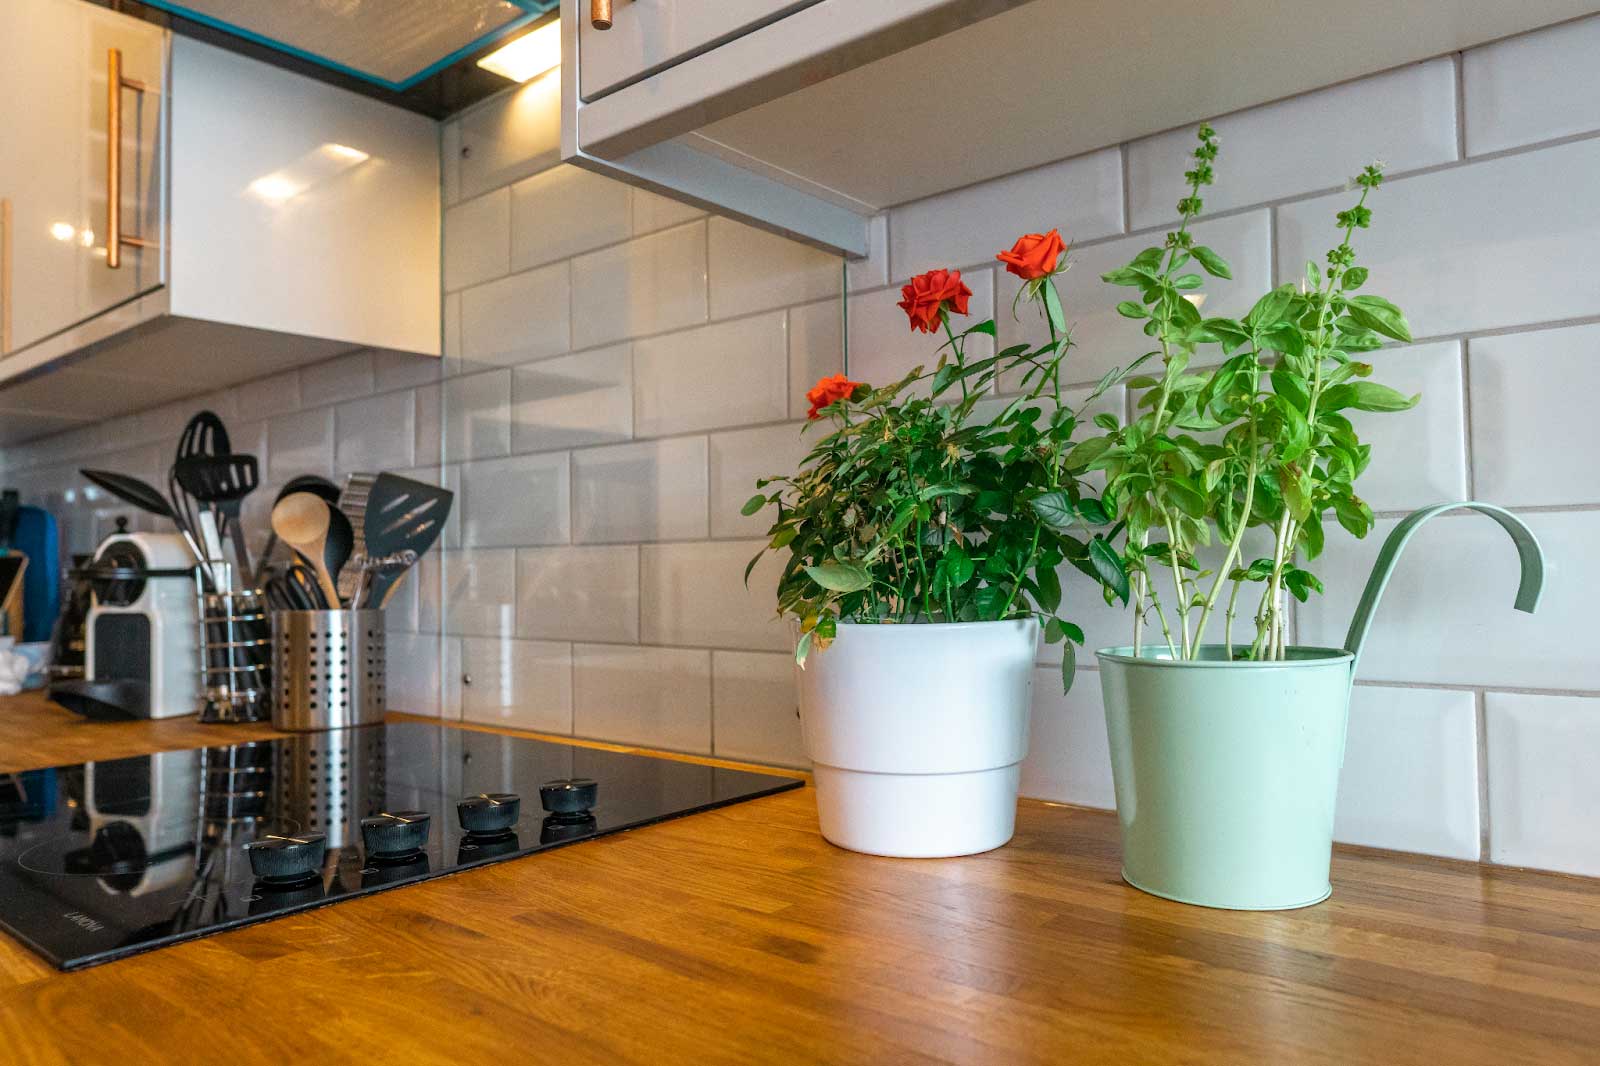 Kitchen with two pants on the counter top in pots, vibrant green and red colors.